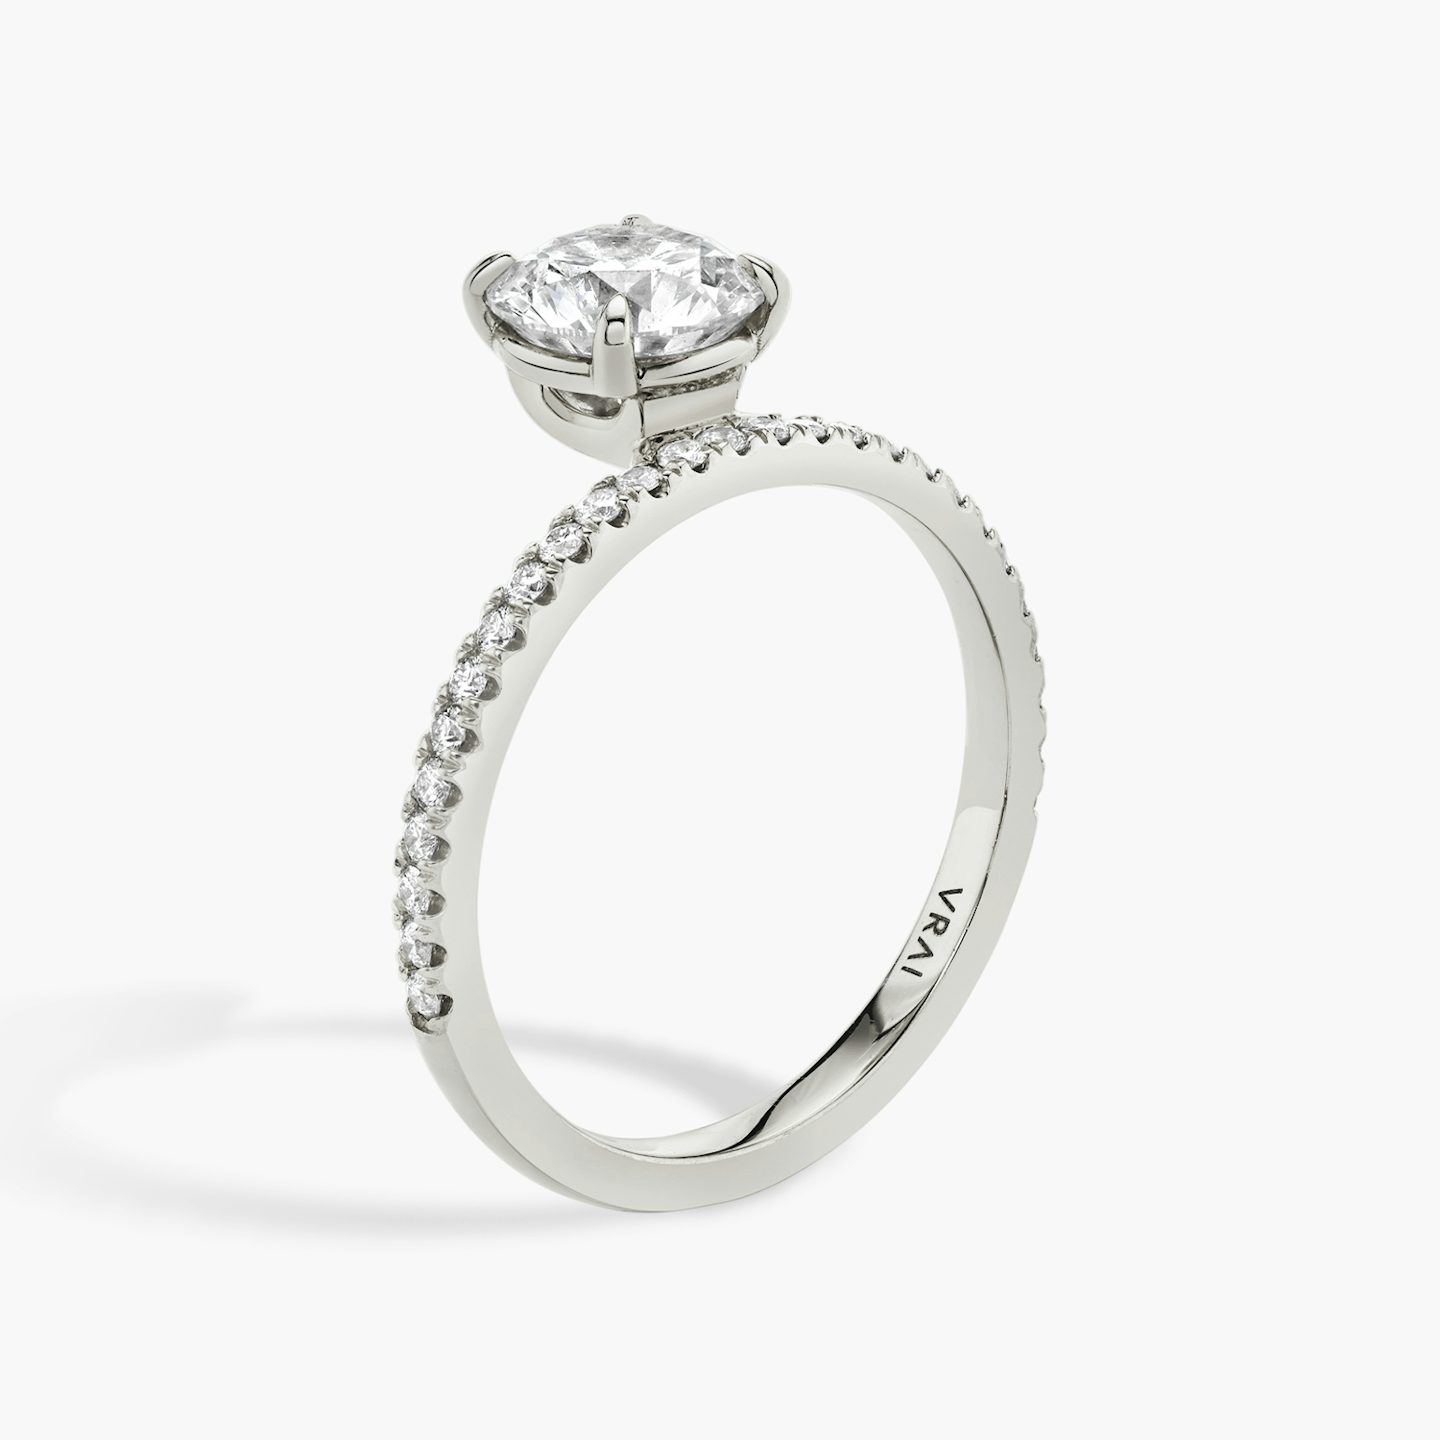 The Hover | Round Brilliant | 18k | 18k White Gold | Band: Pavé | Carat weight: 2 | Diamond orientation: vertical